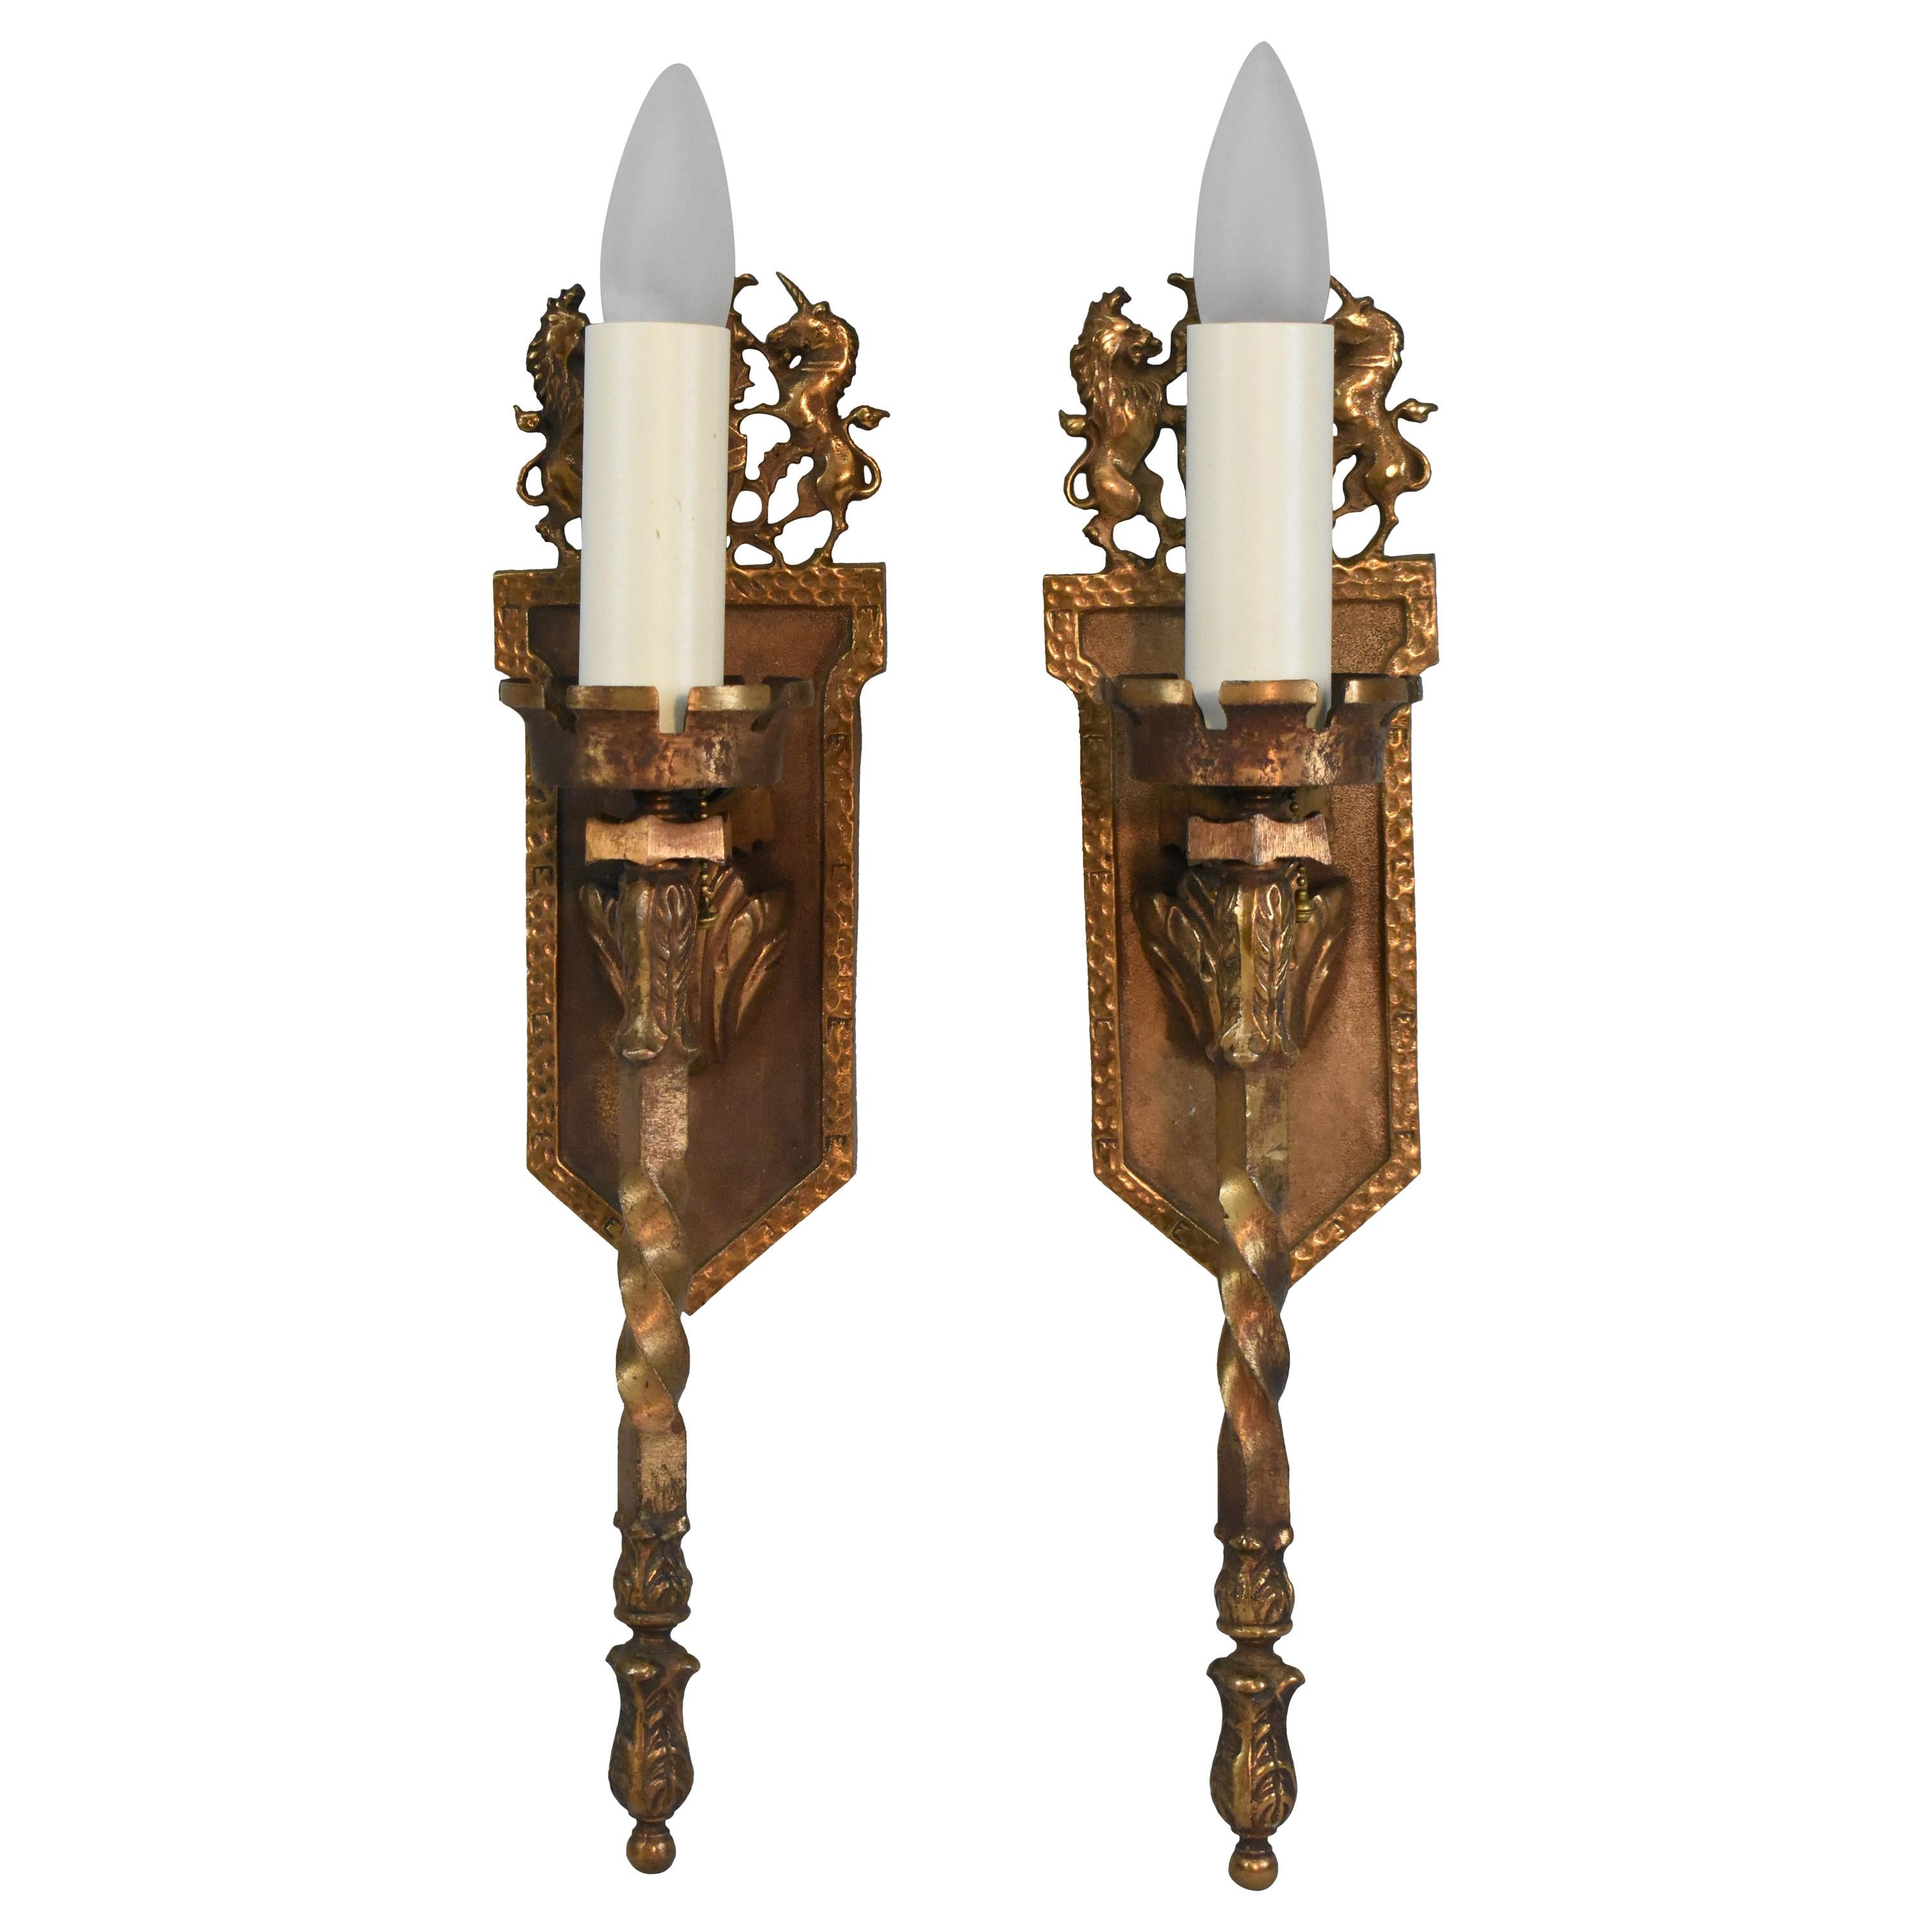 Pair of Antique Gothic Brass Wall Sconces Unicorns, Shield with Thistle